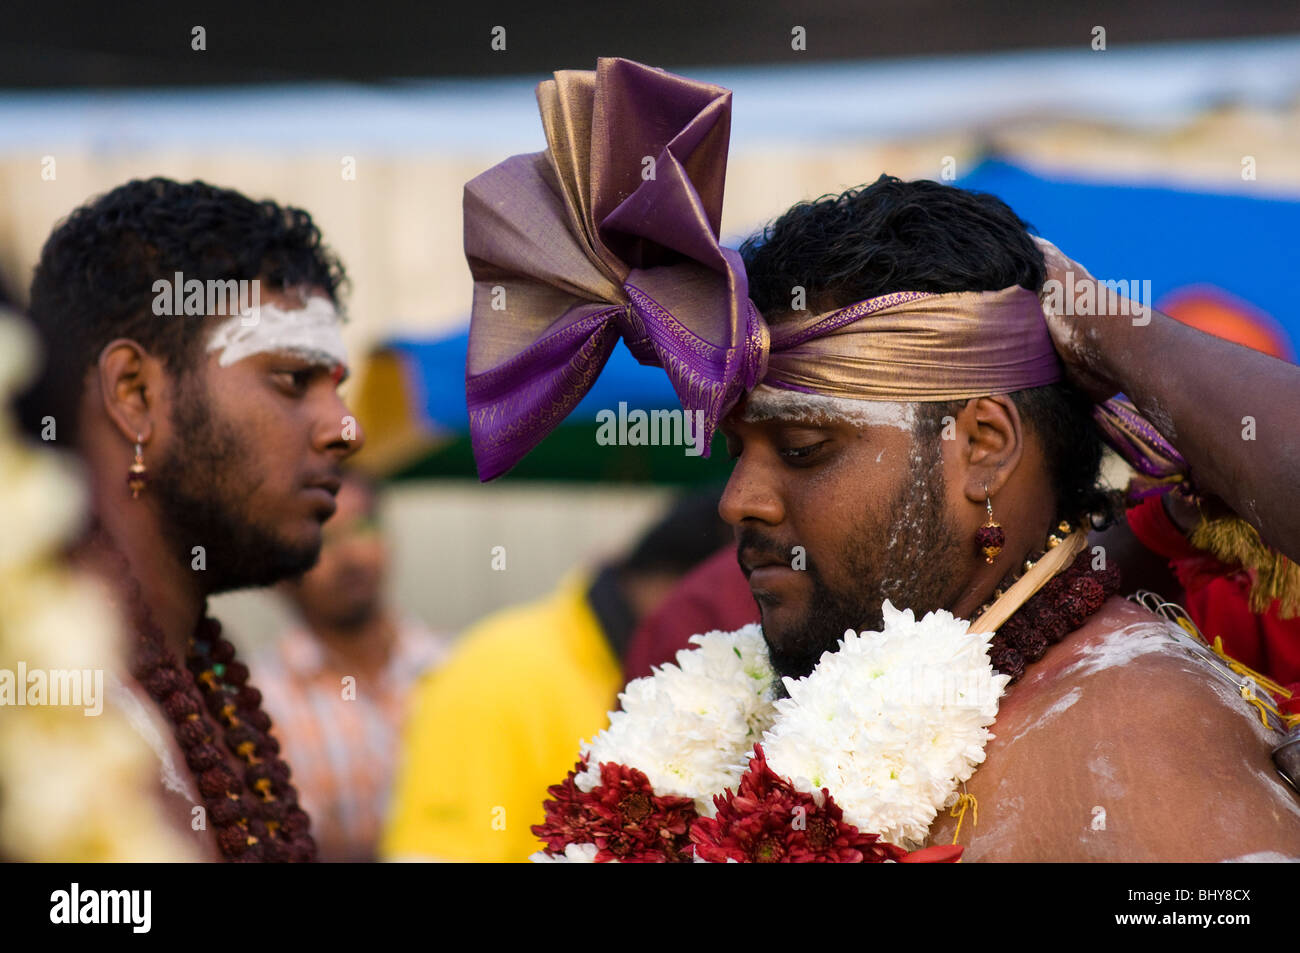 Pilgrims at thaipusam Malaysia 2010 being posessed ,Thaipusam is a Hindu festival celebrated mostly by the Tamil community. Stock Photo